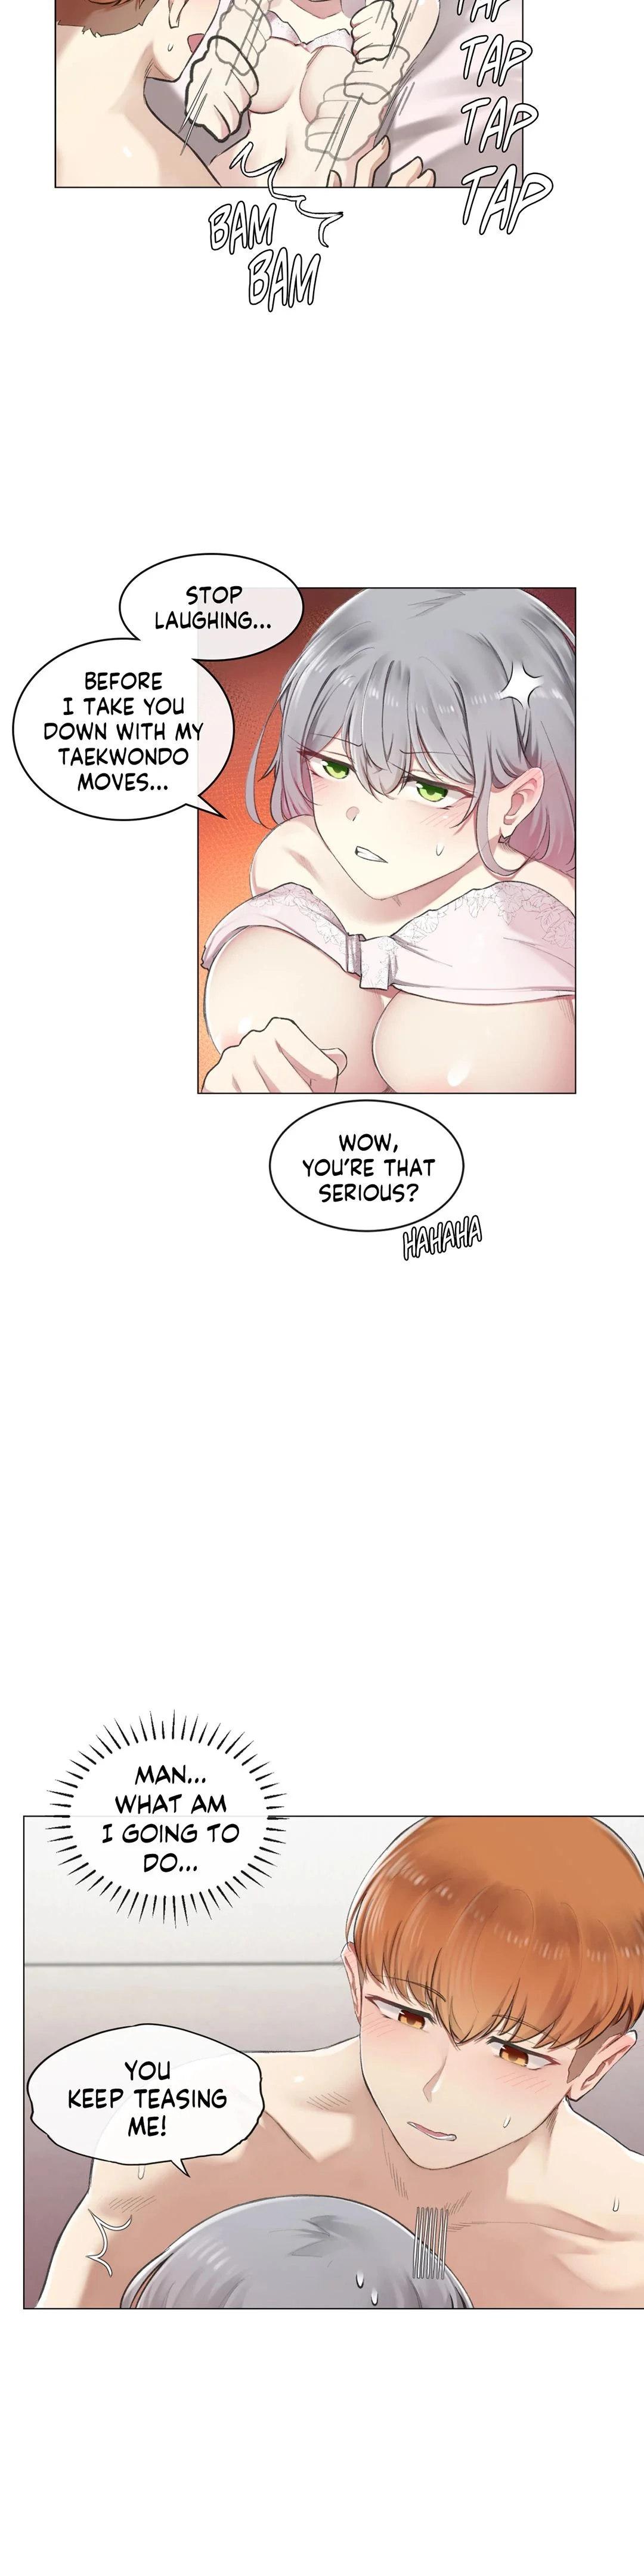 [Dumangoon, KONG_] Sexcape Room: Snap Off Ch.7/7 [English] [Manhwa PDF] Completed 108